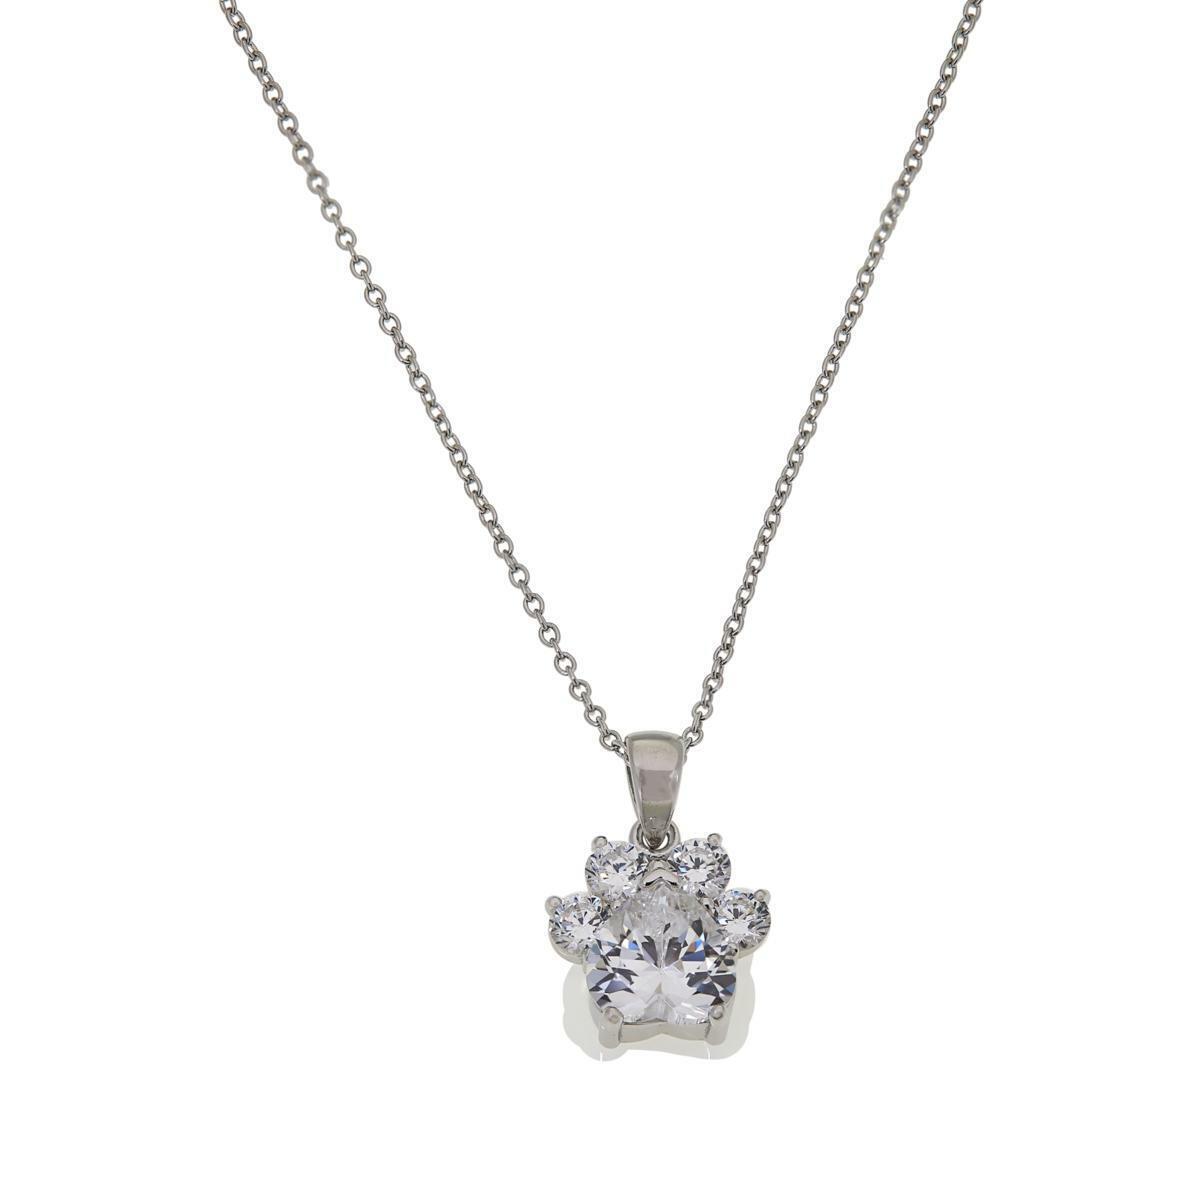 Absolute Sterling Silver Cubic Zirconia Dog Print Pendant & Necklace 18"